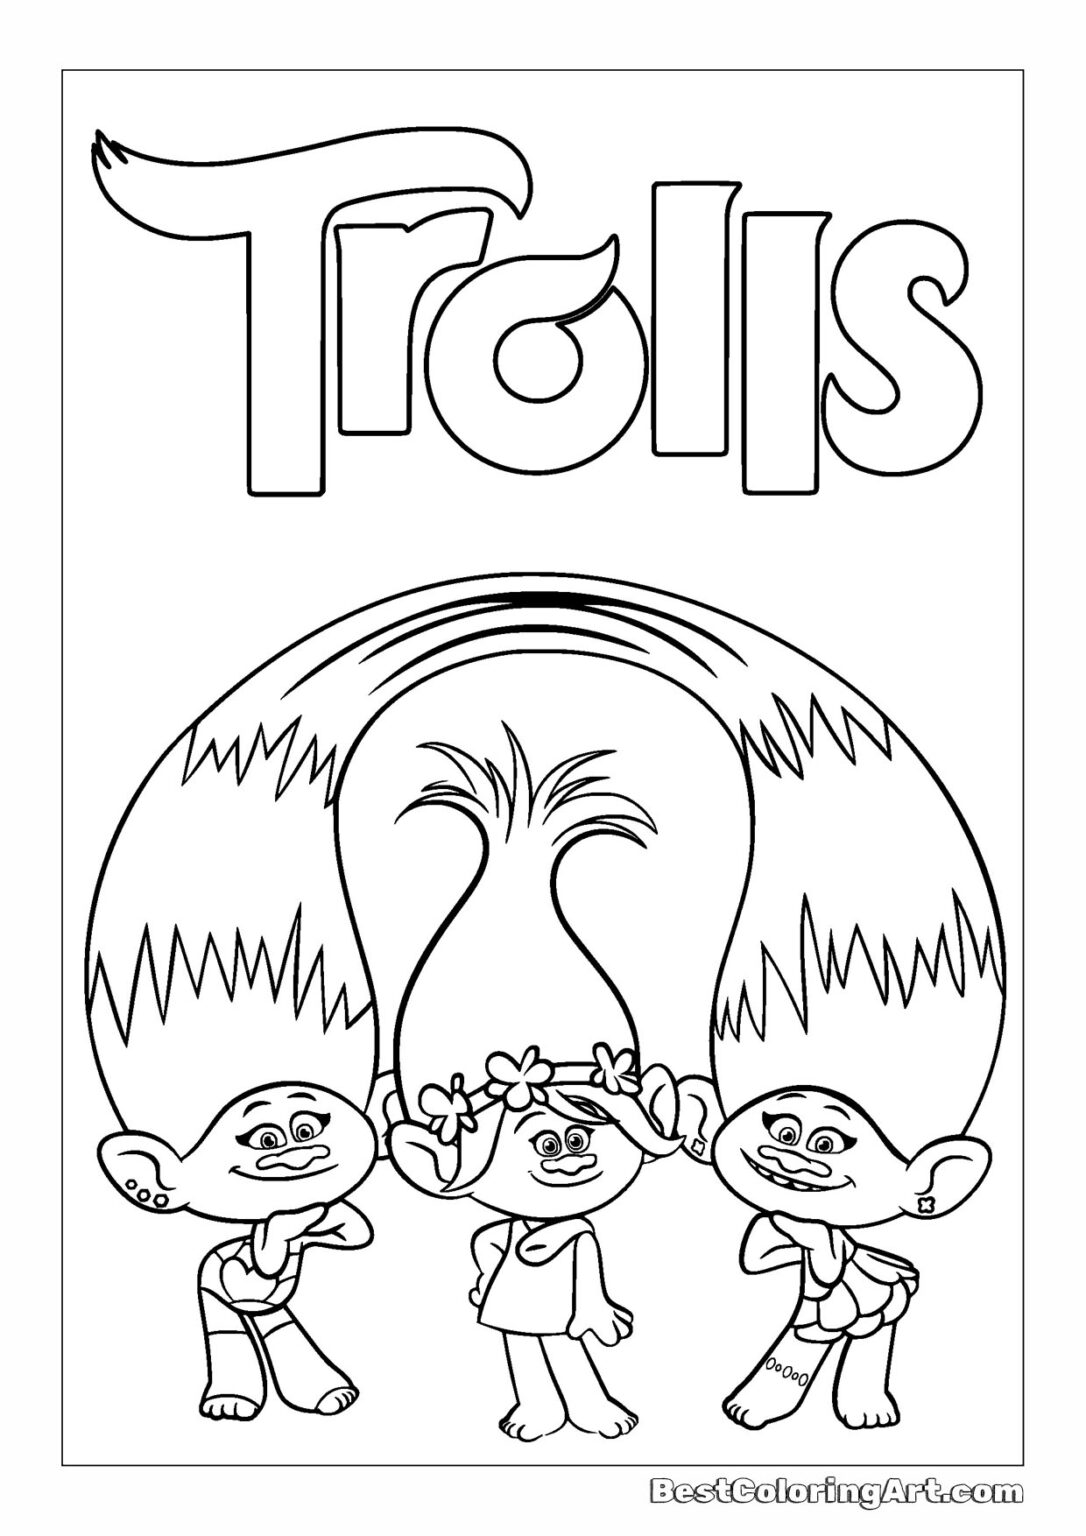 Trolls coloring pages - BestColoringArt.com